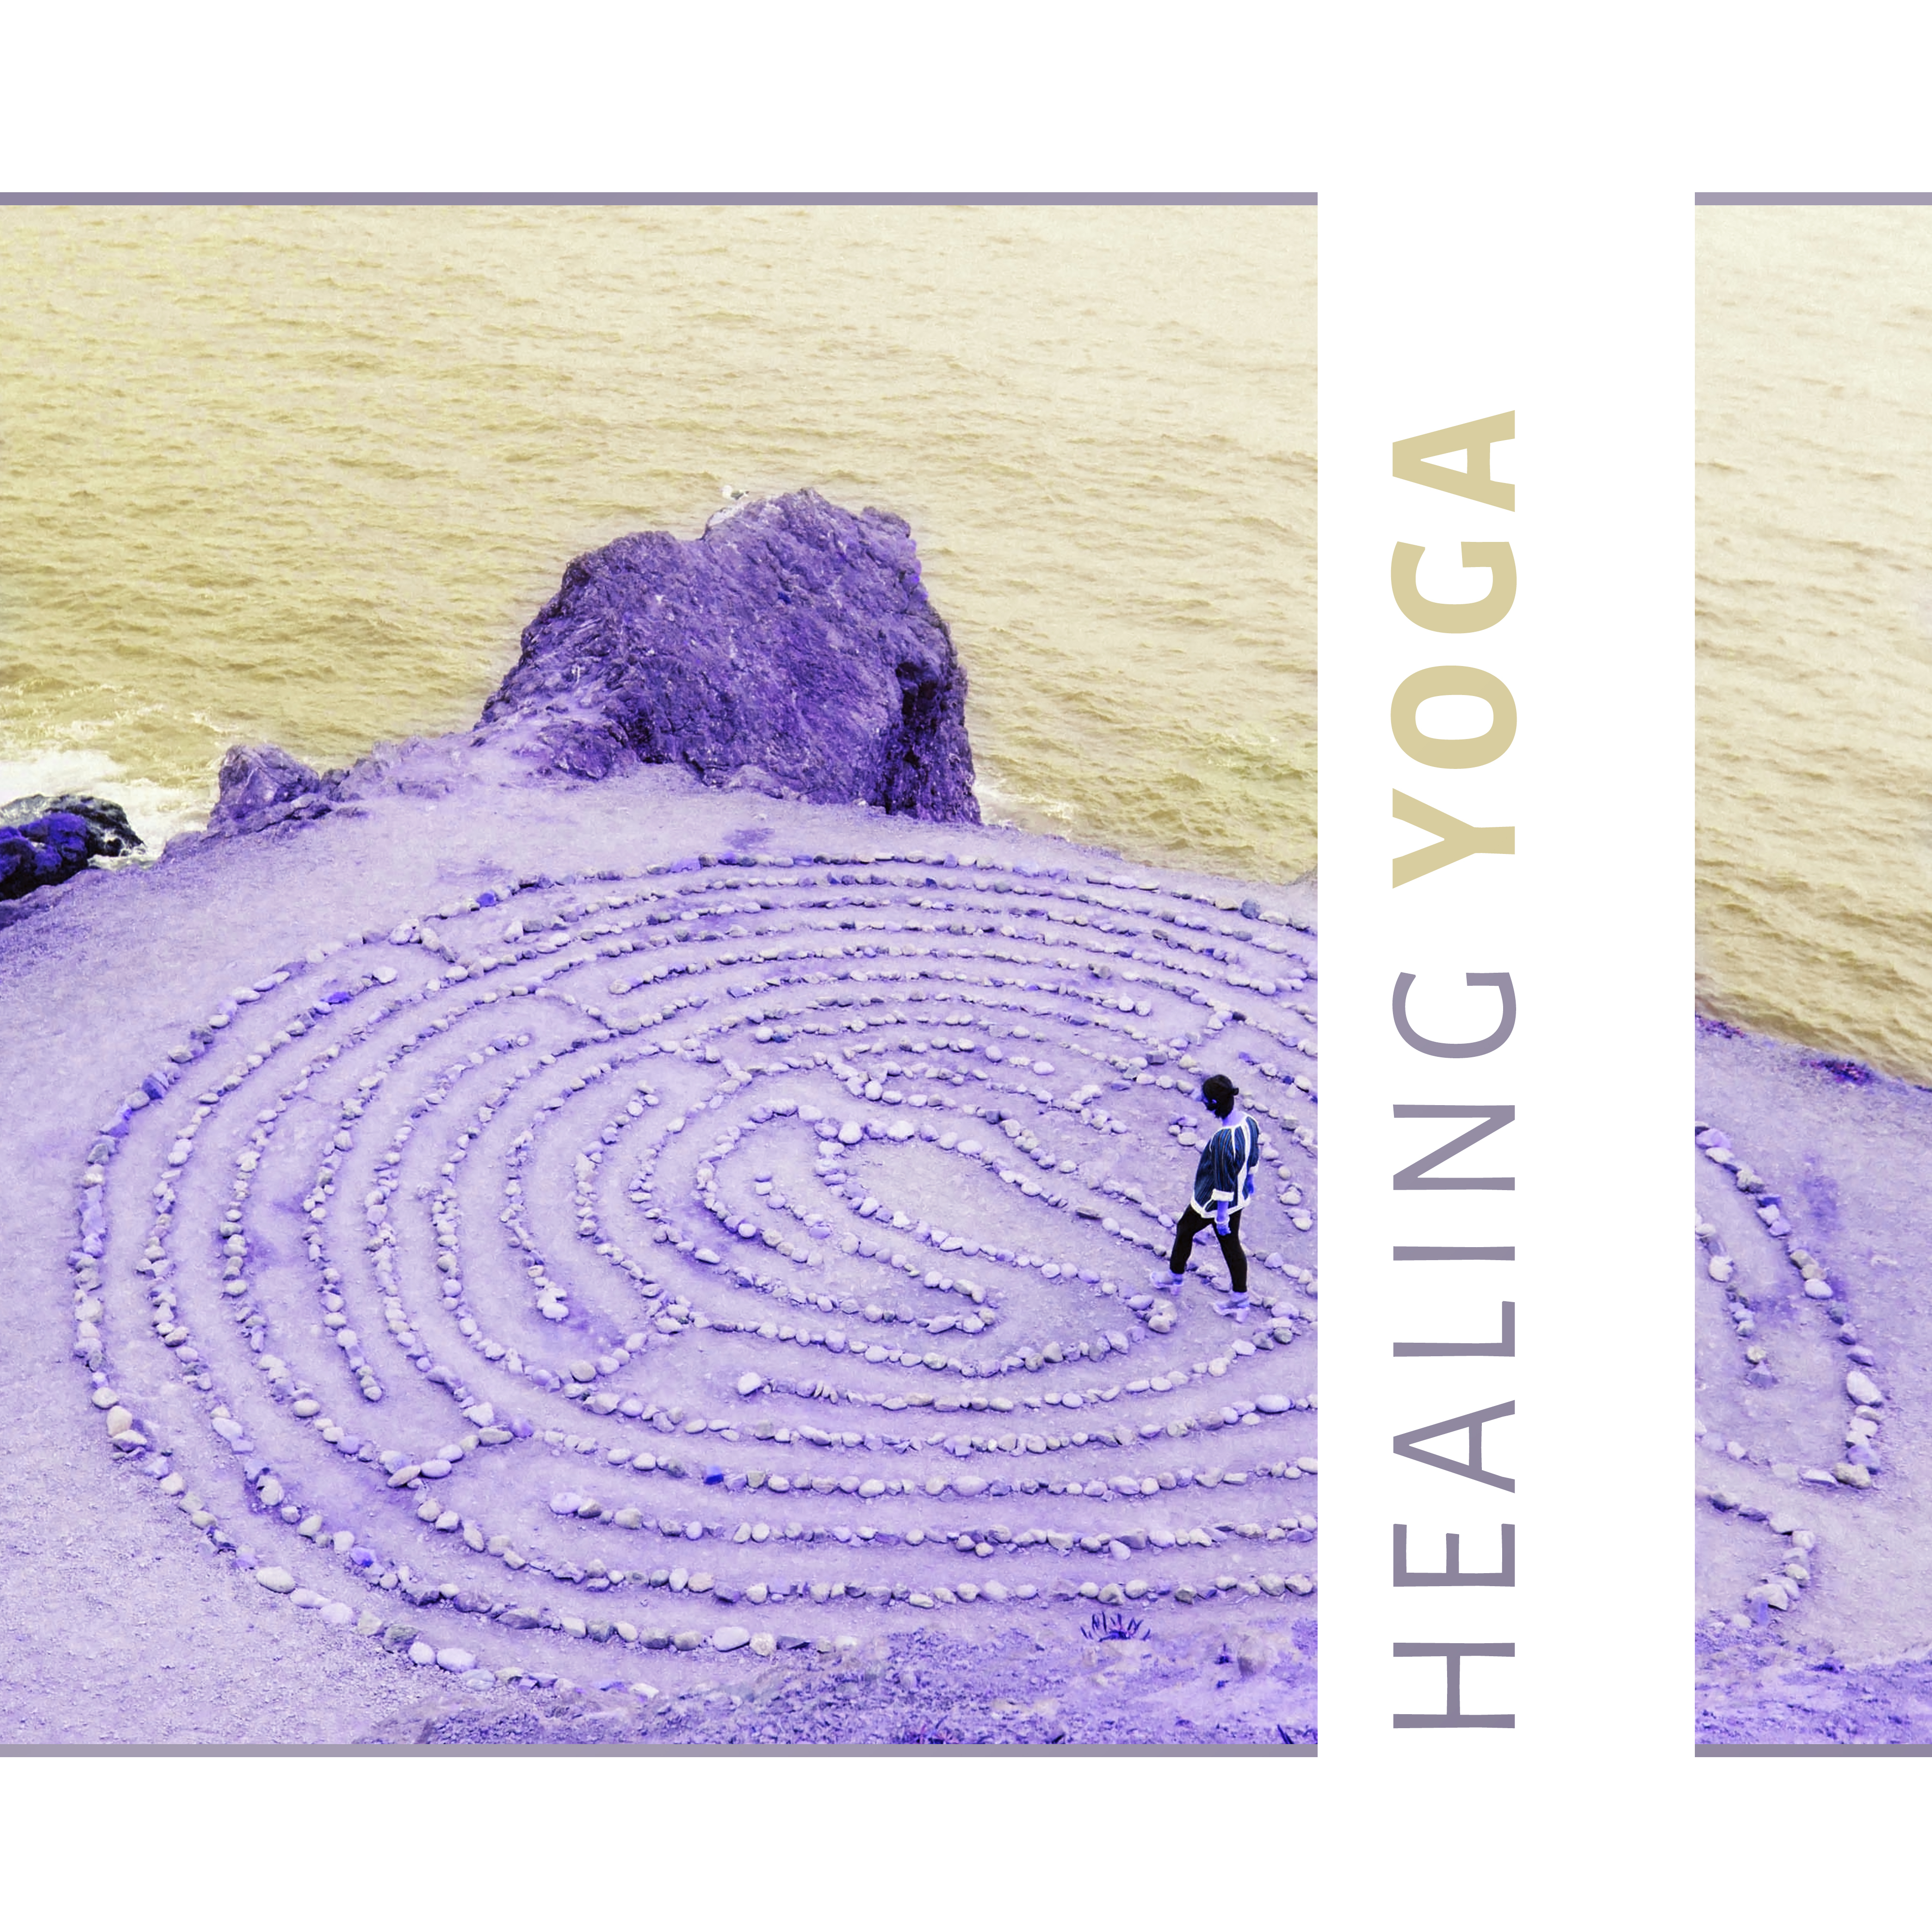 Healing Yoga  New Age Music for Training Poses, Calming Nature Sounds, Bird Sounds for Yoga